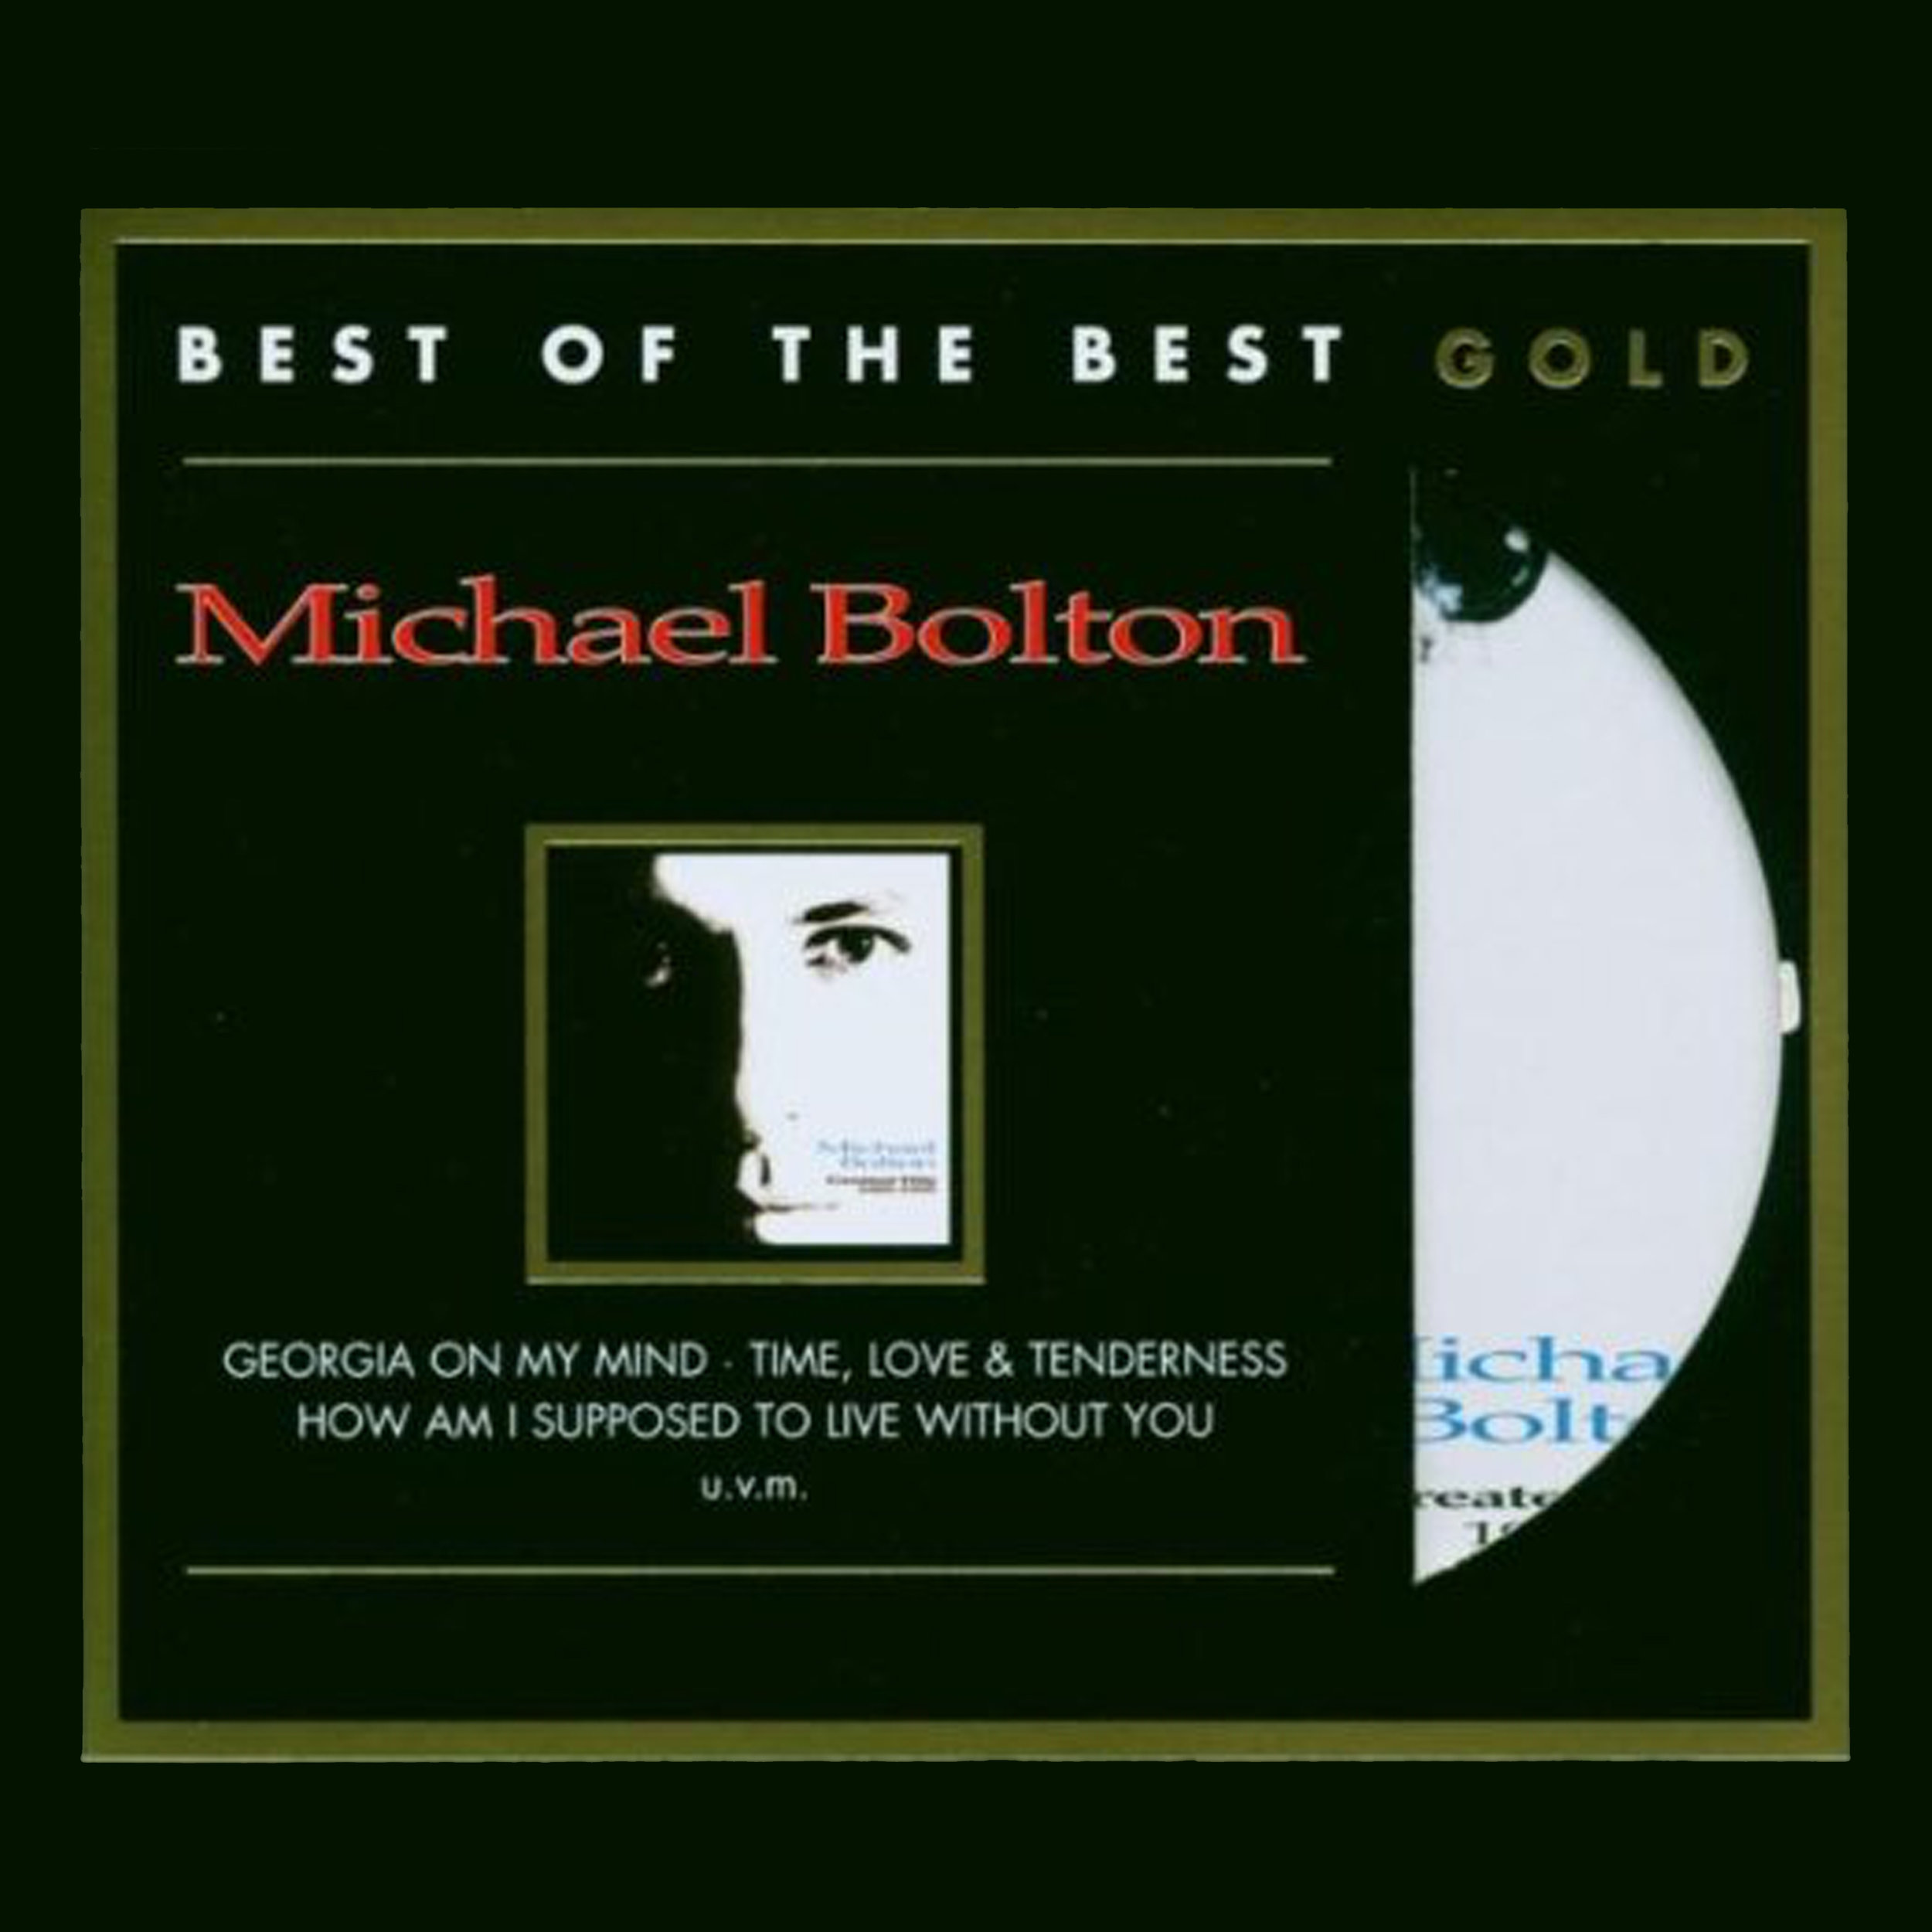 Michael Bolton The Best of Gold.jpg